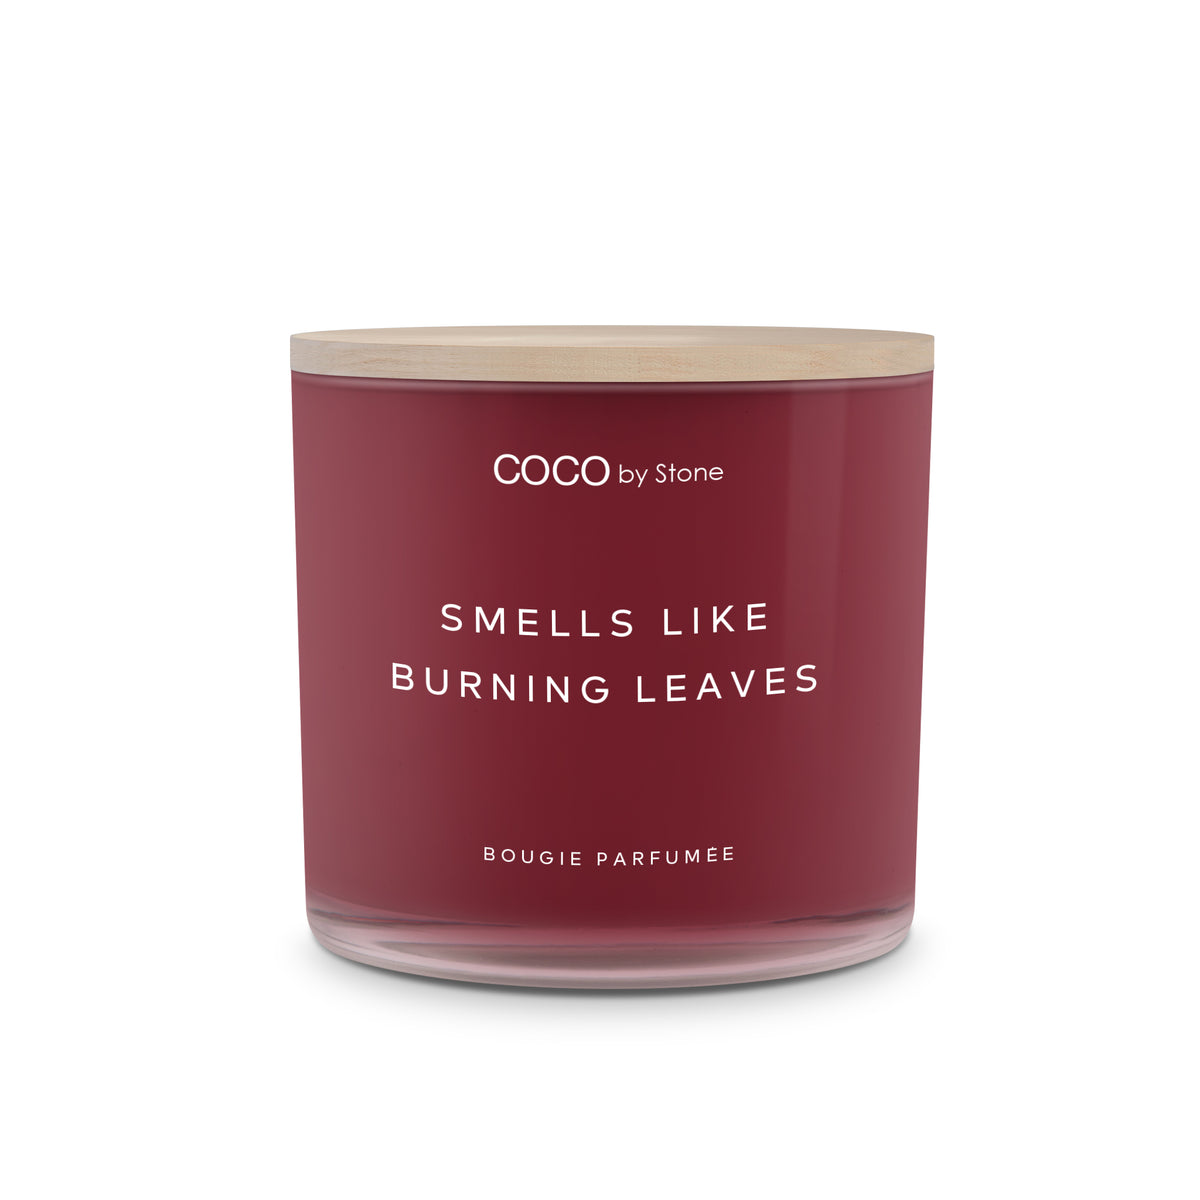 25 Best Scented Candles 2022 - Top Scented Candle Brands